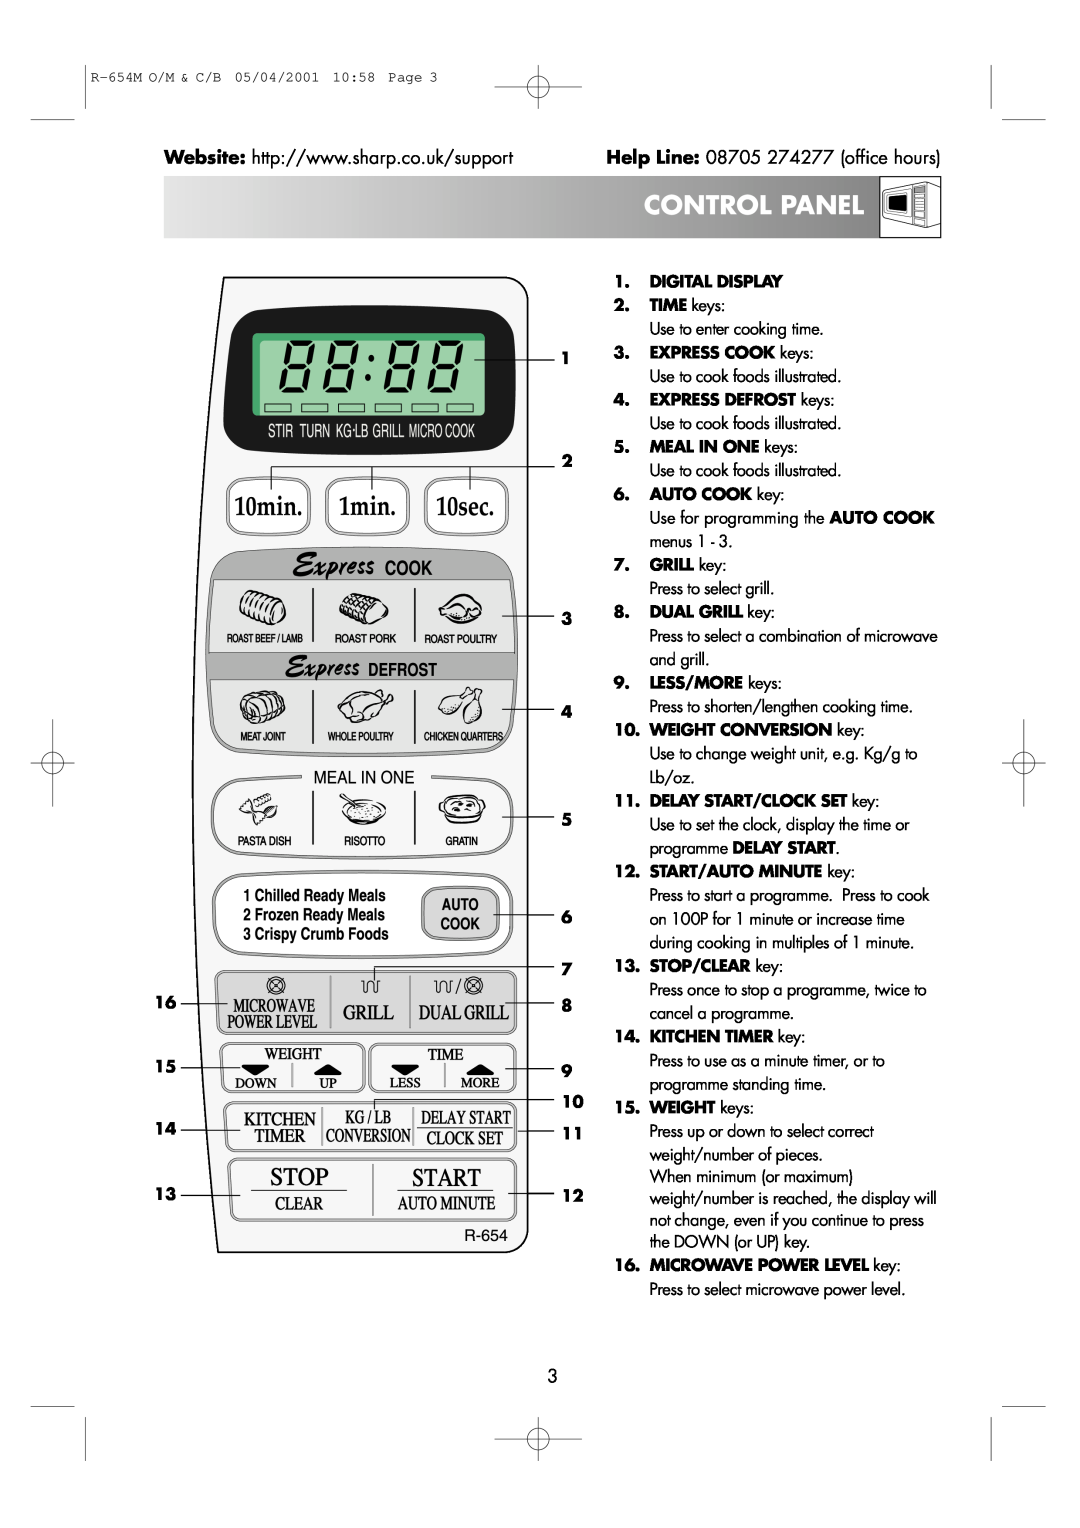 Sharp R-654M operation manual Controlpanel, Help Line 08705 274277 office hours, Press to select a combination of microwave 